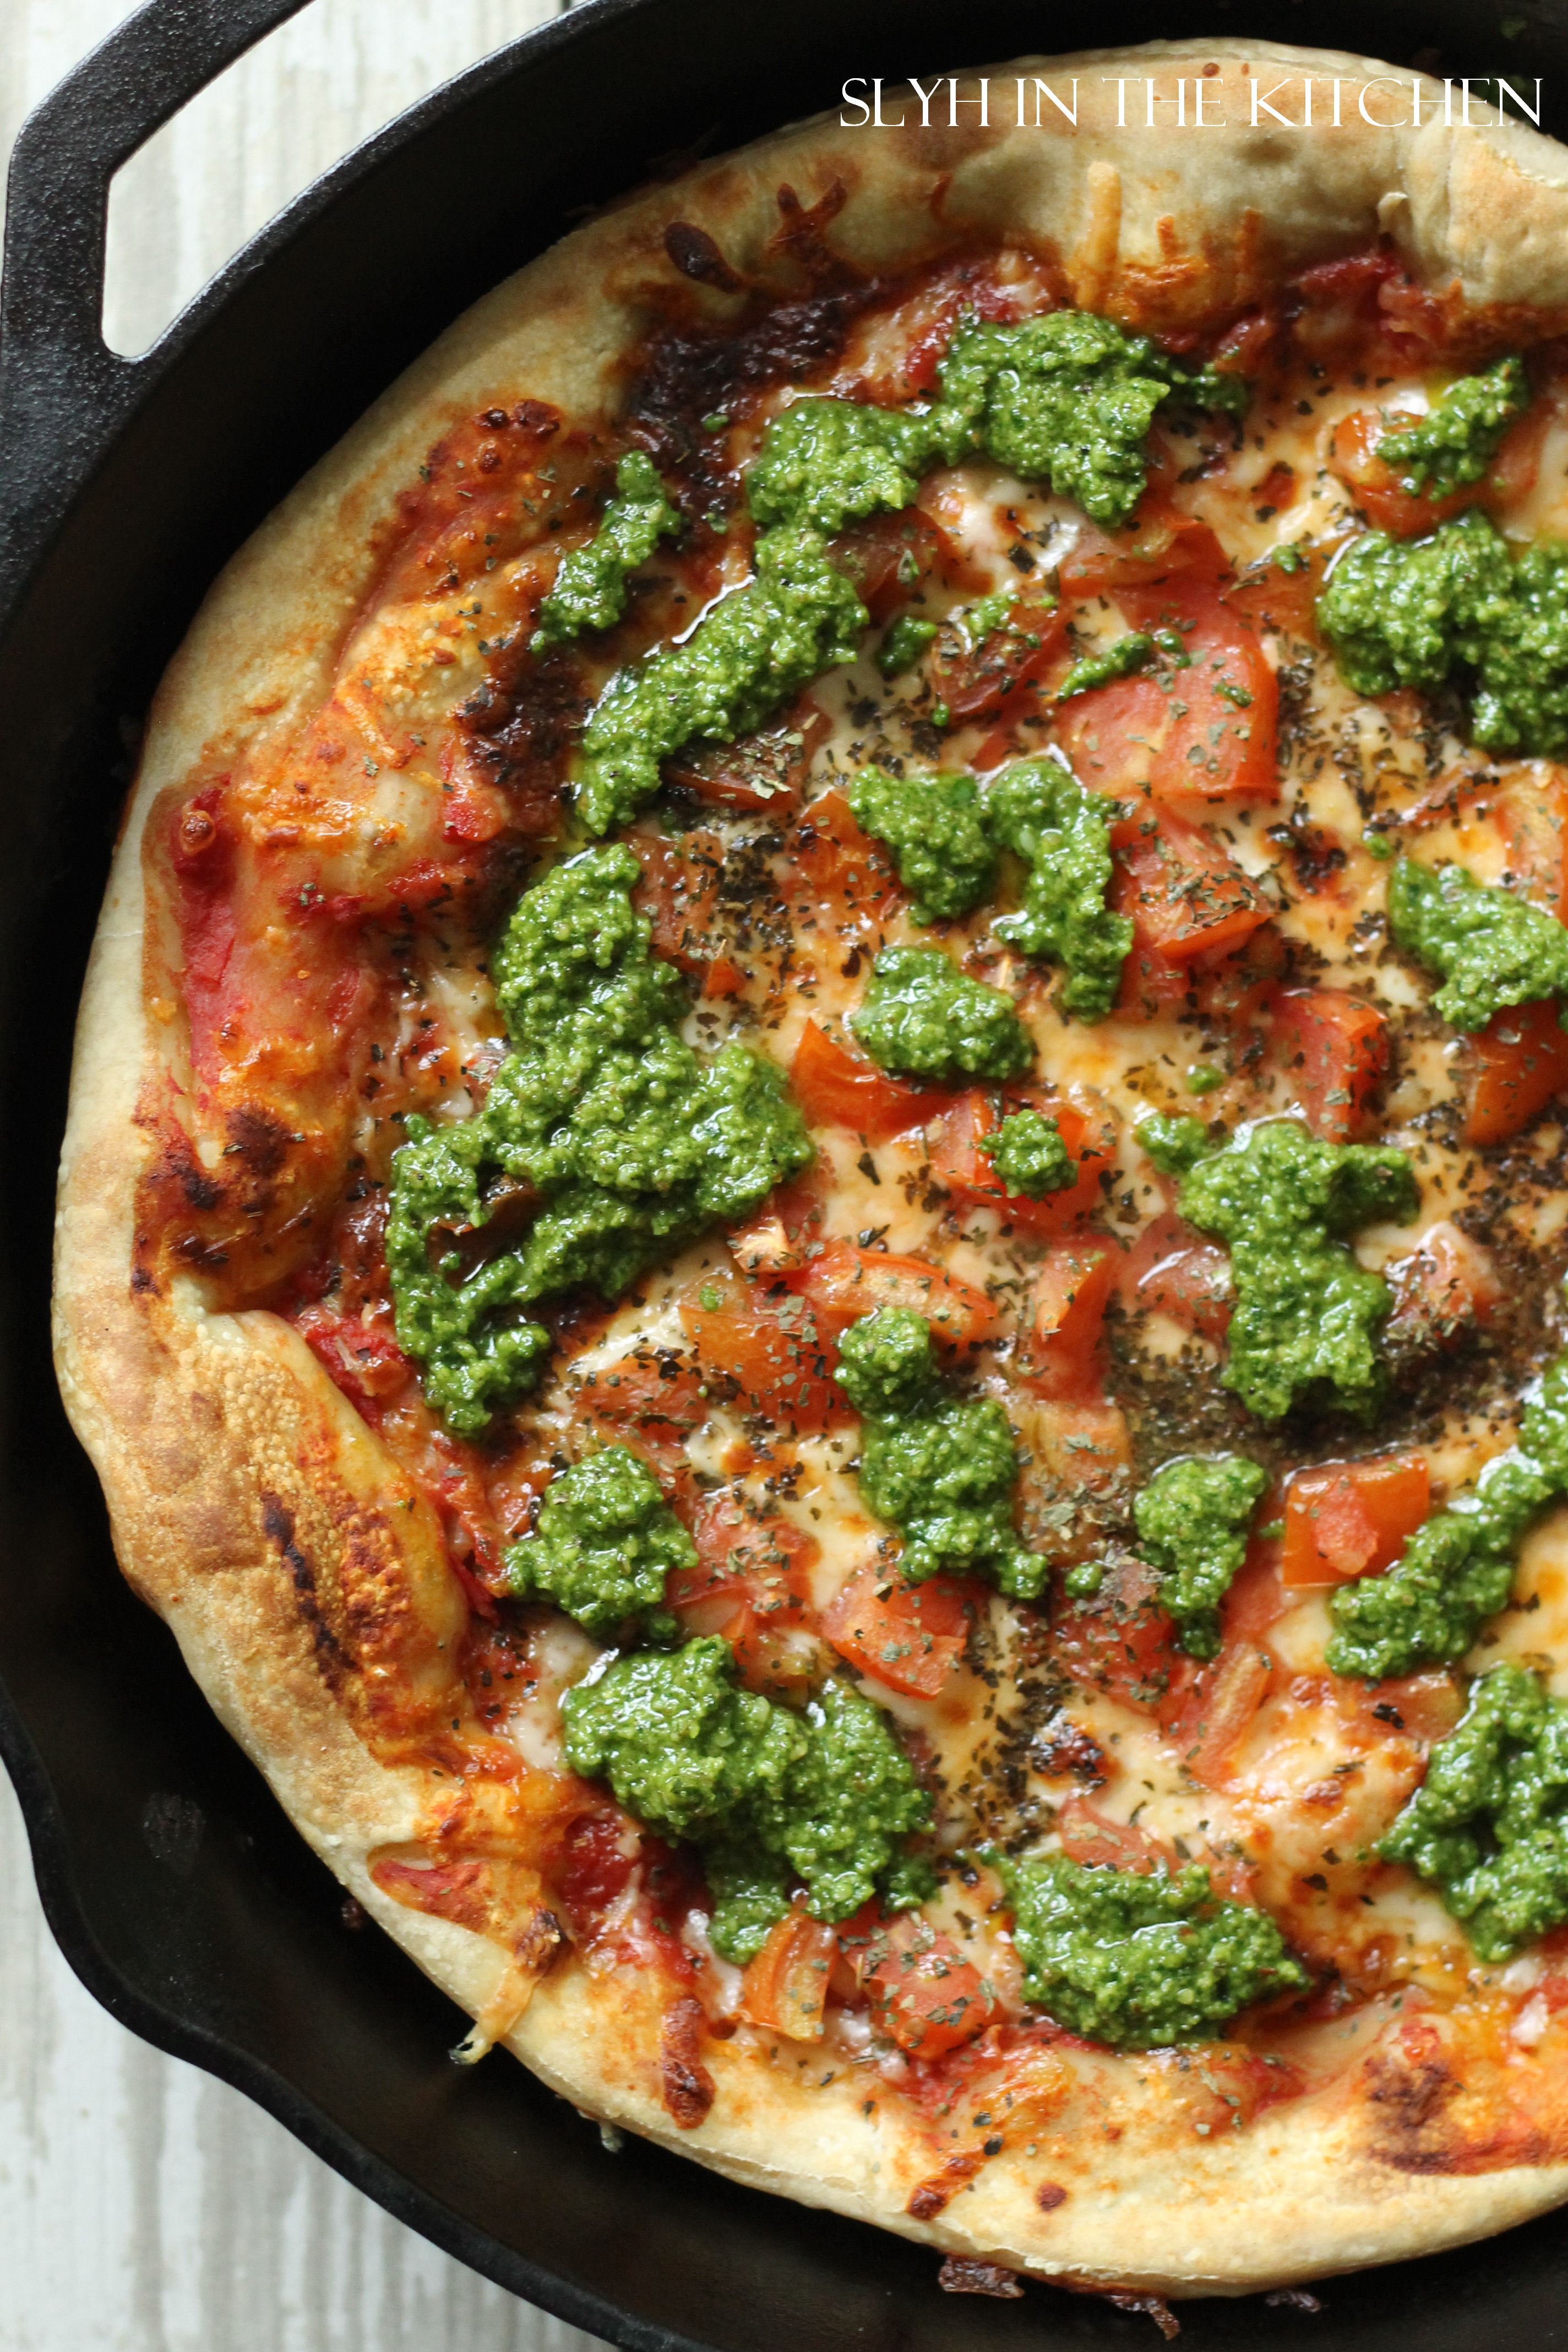 http://www.slyhkitchen.com/wp-content/uploads/2016/04/Margherita-Pizza-with-Pesto-Drizzle.jpg